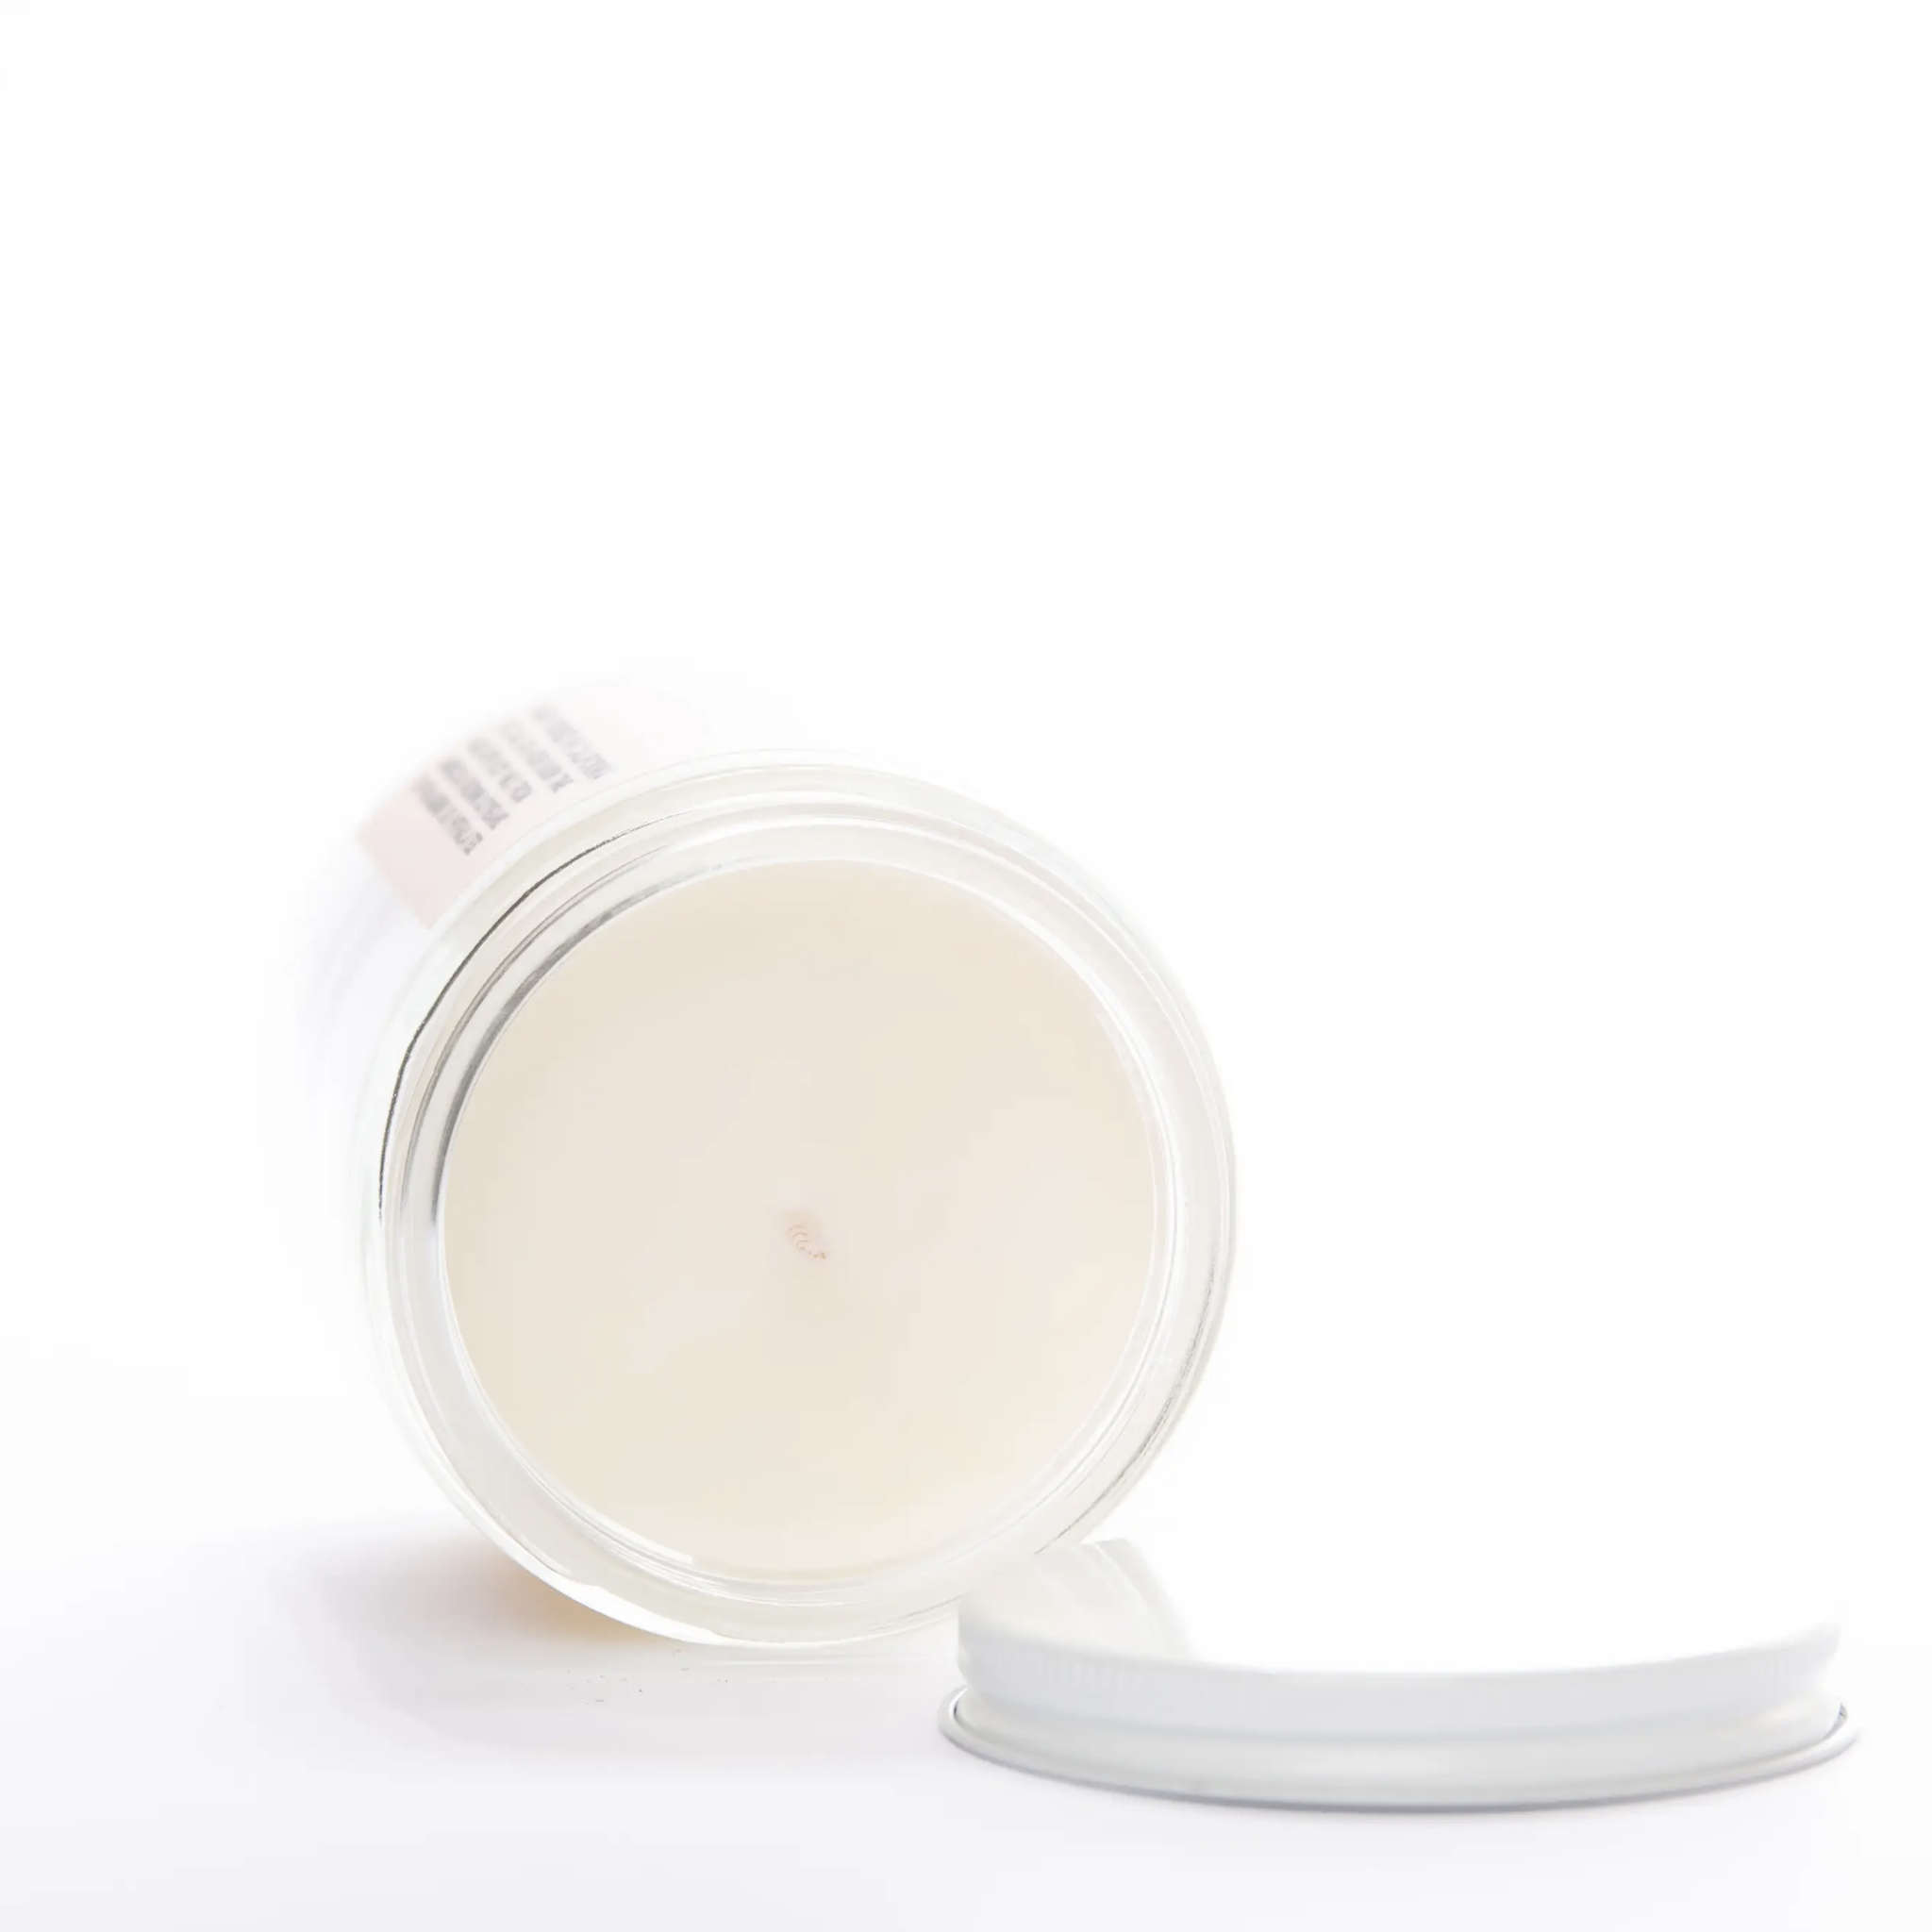 BEST MOM EVER • NON TOXIC SOY CANDLE